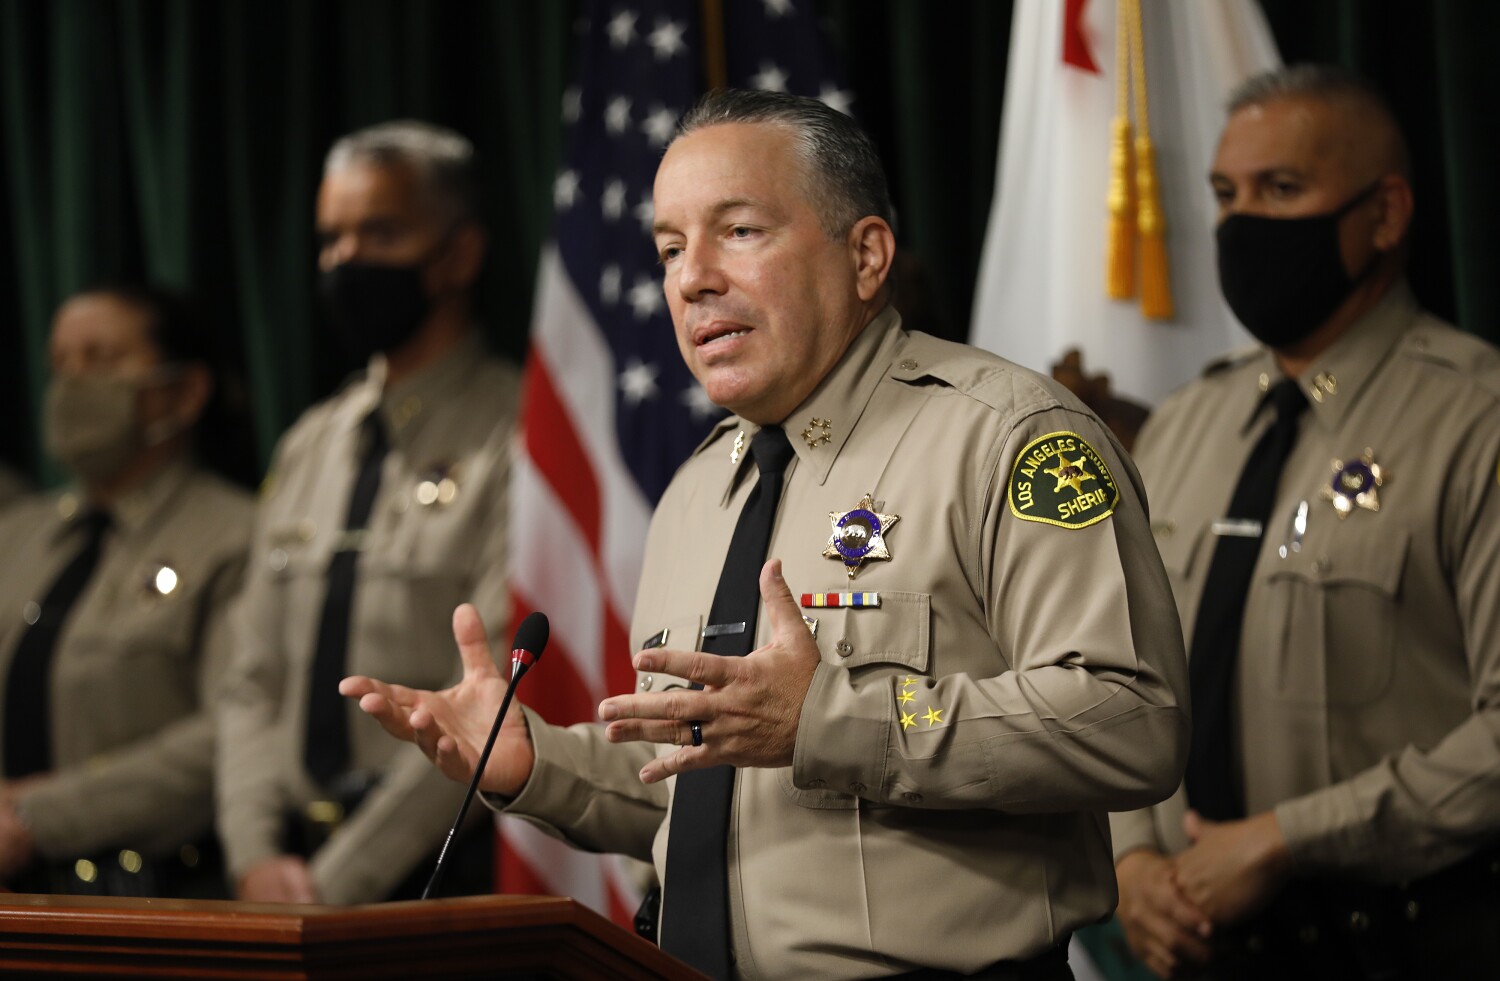 Column: He fooled voters once. Can Sheriff Villanueva do it again?